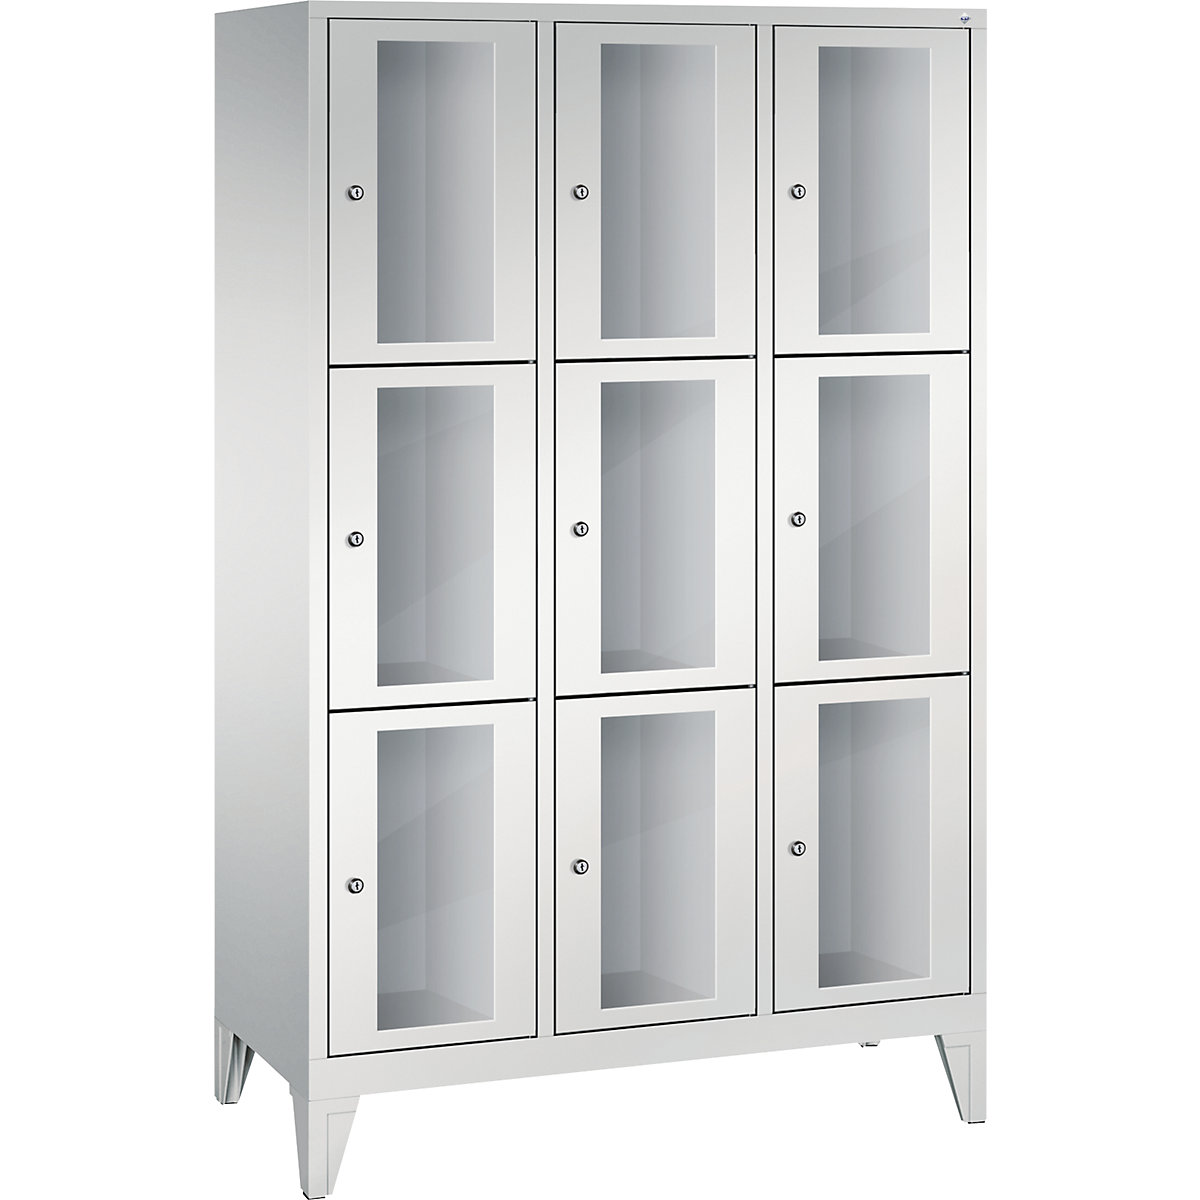 CLASSIC locker unit, compartment height 510 mm, with feet – C+P, 9 compartments, width 1200 mm, light grey door-7